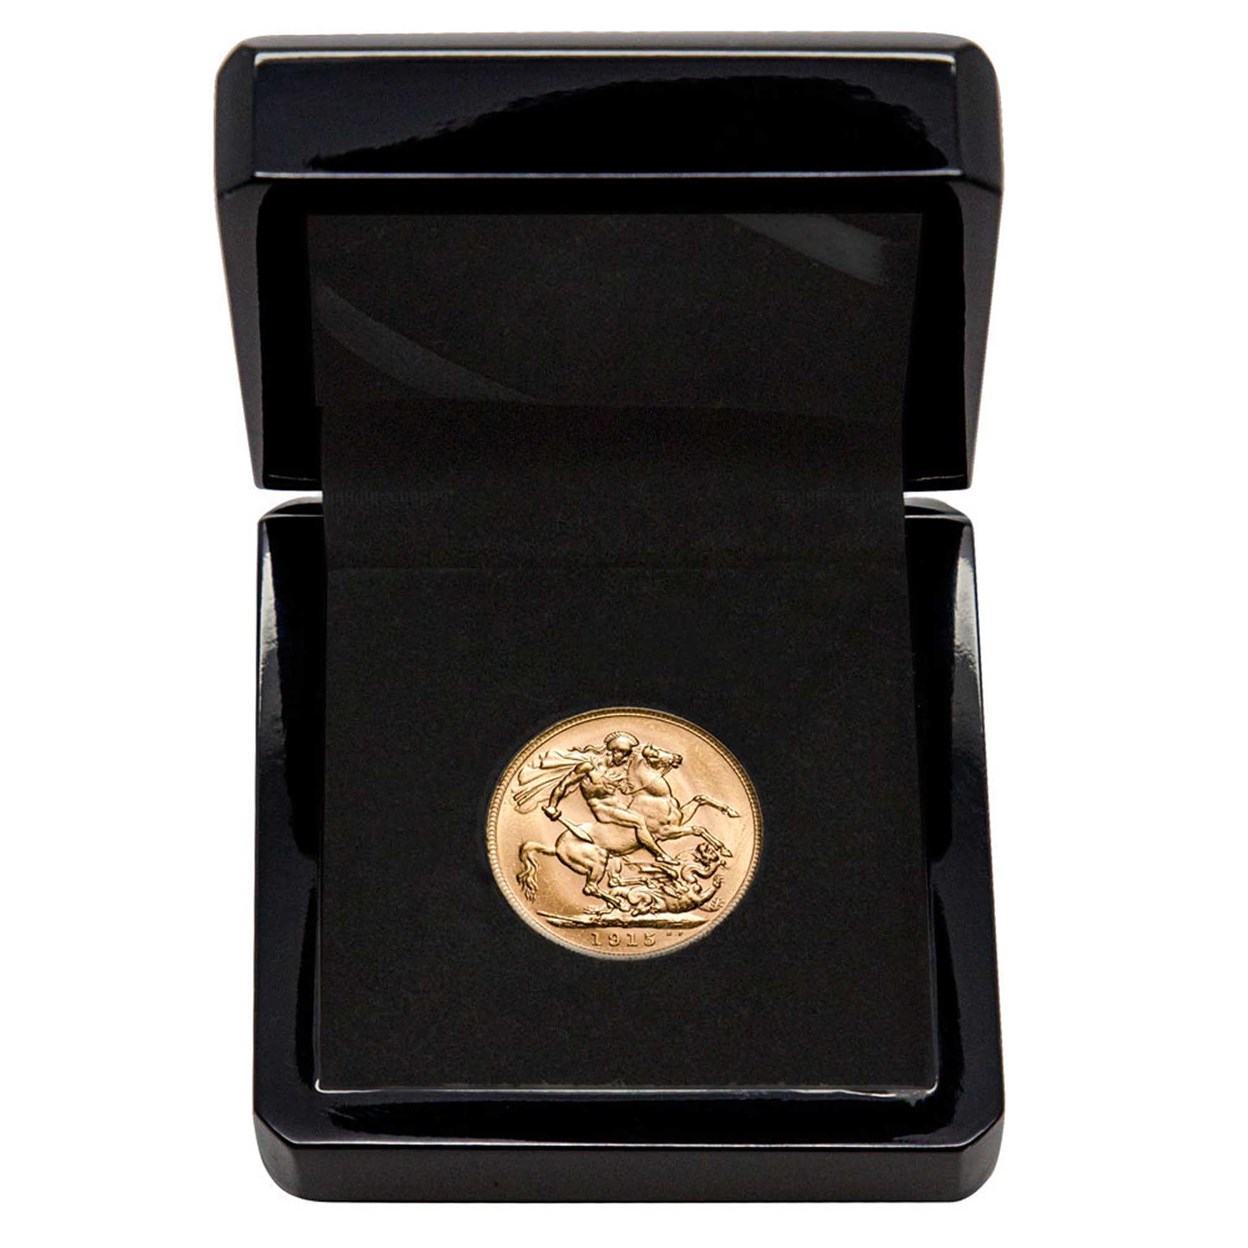 03 1915 king george v perth mint gold sovereign 2015 gold InCase